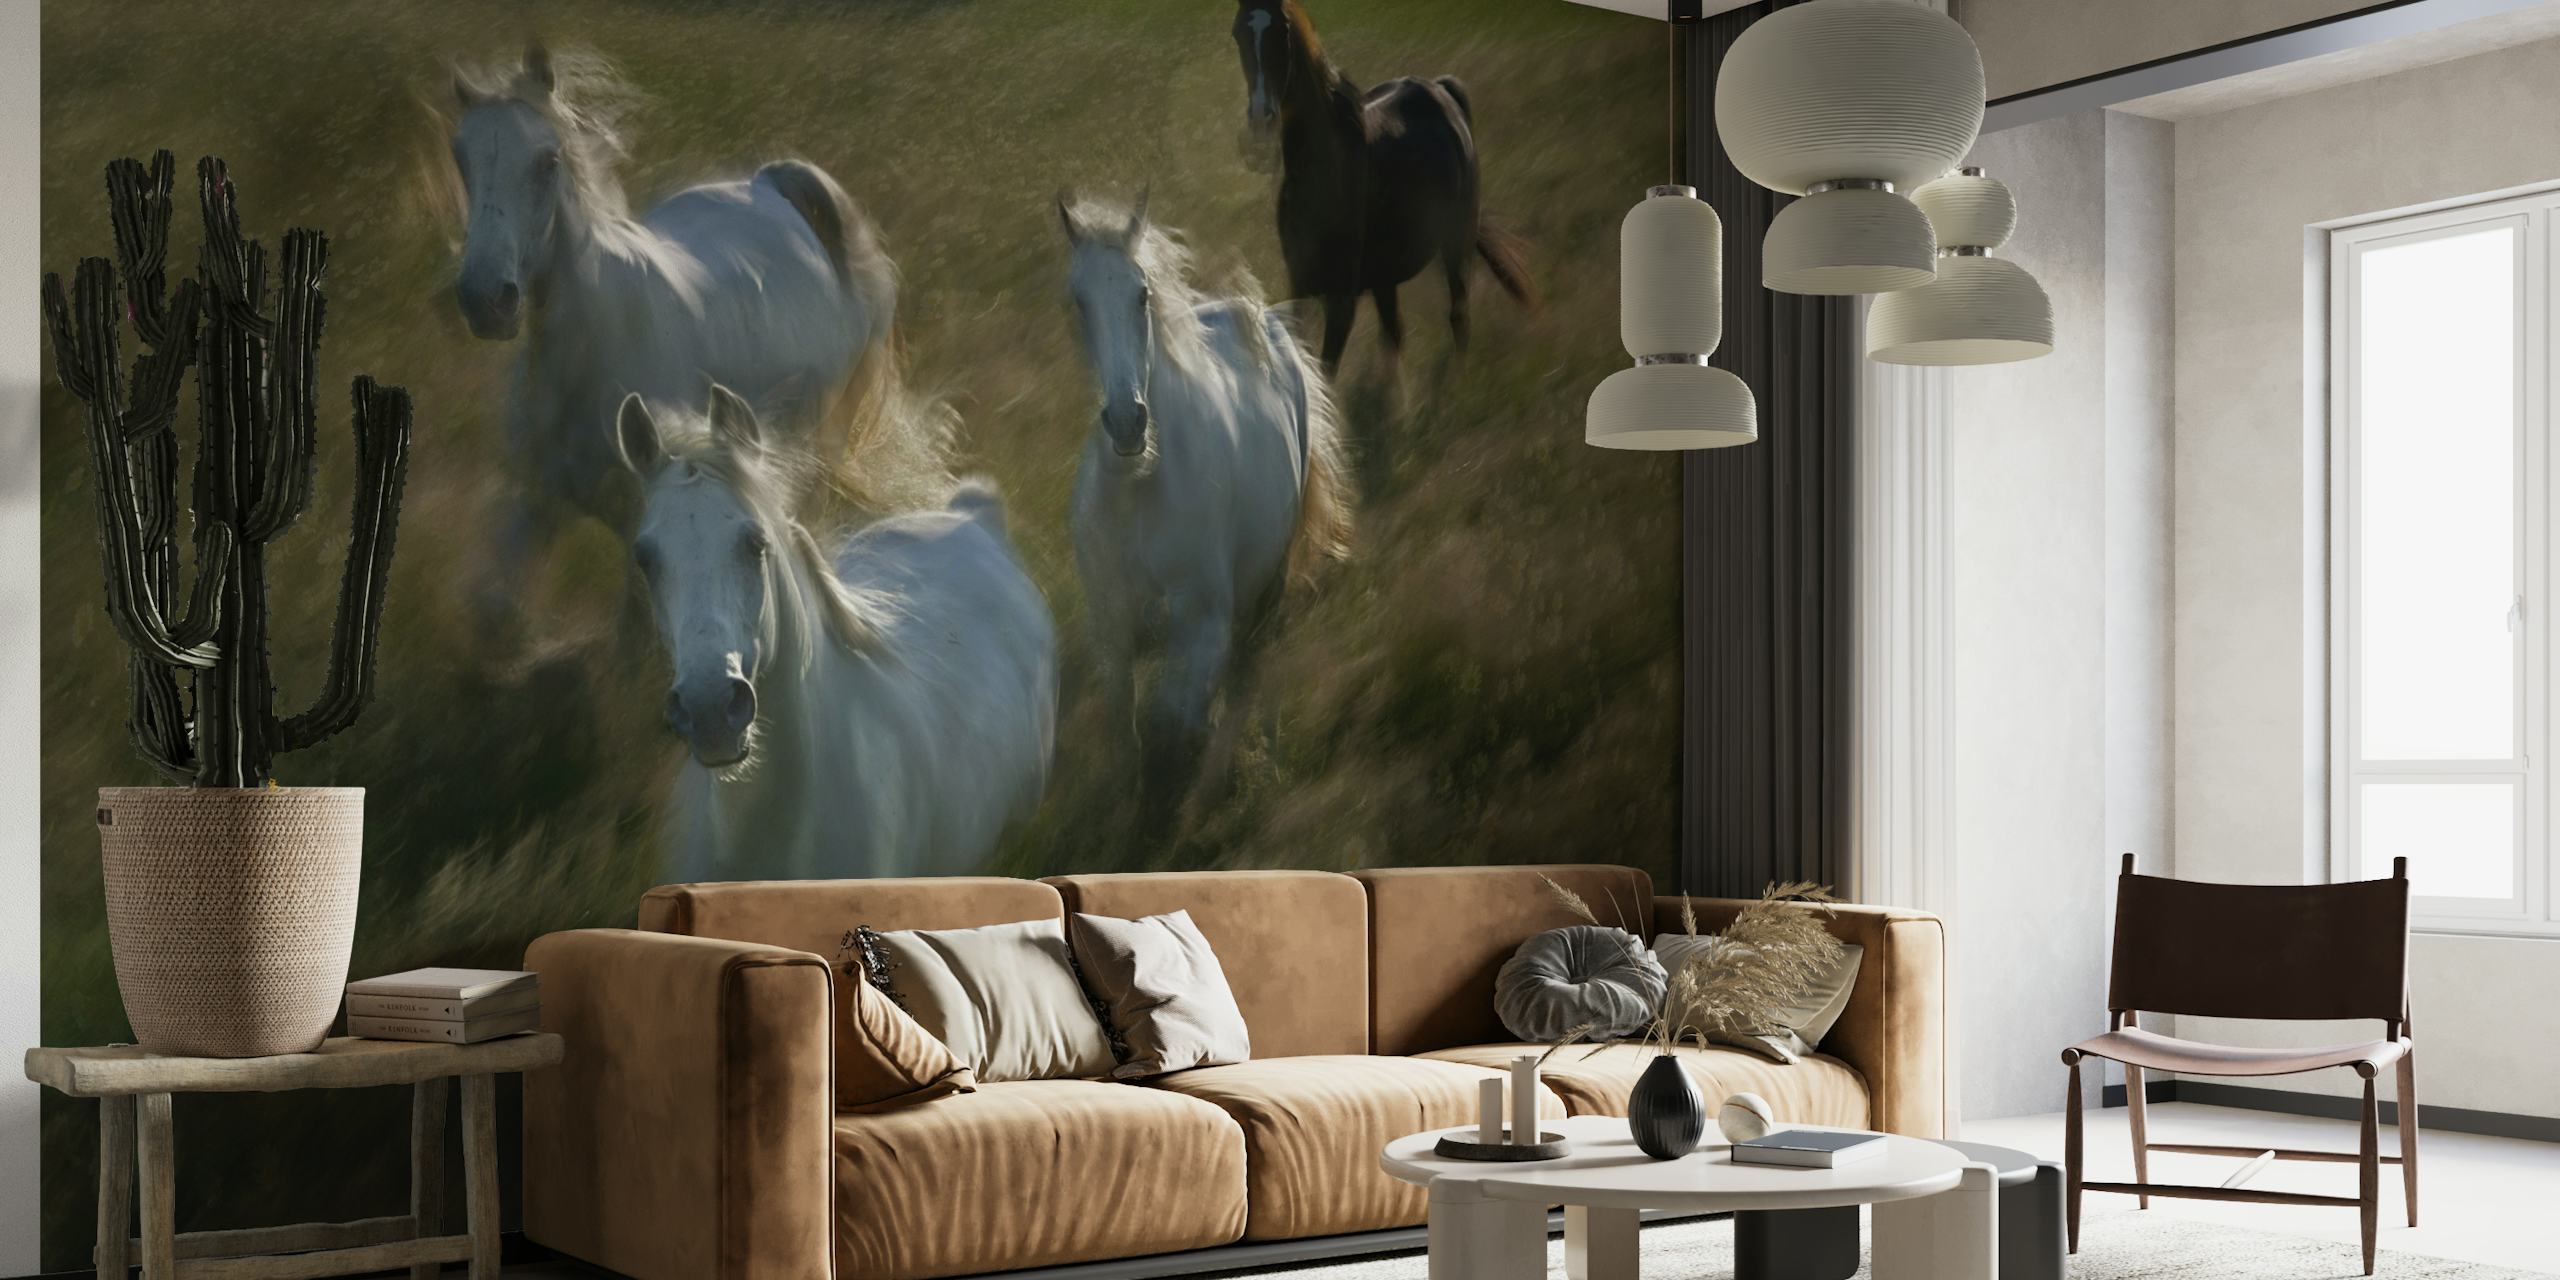 Horses running wall mural depicting a herd of white horses with a dark horse in the background galloping across a field.